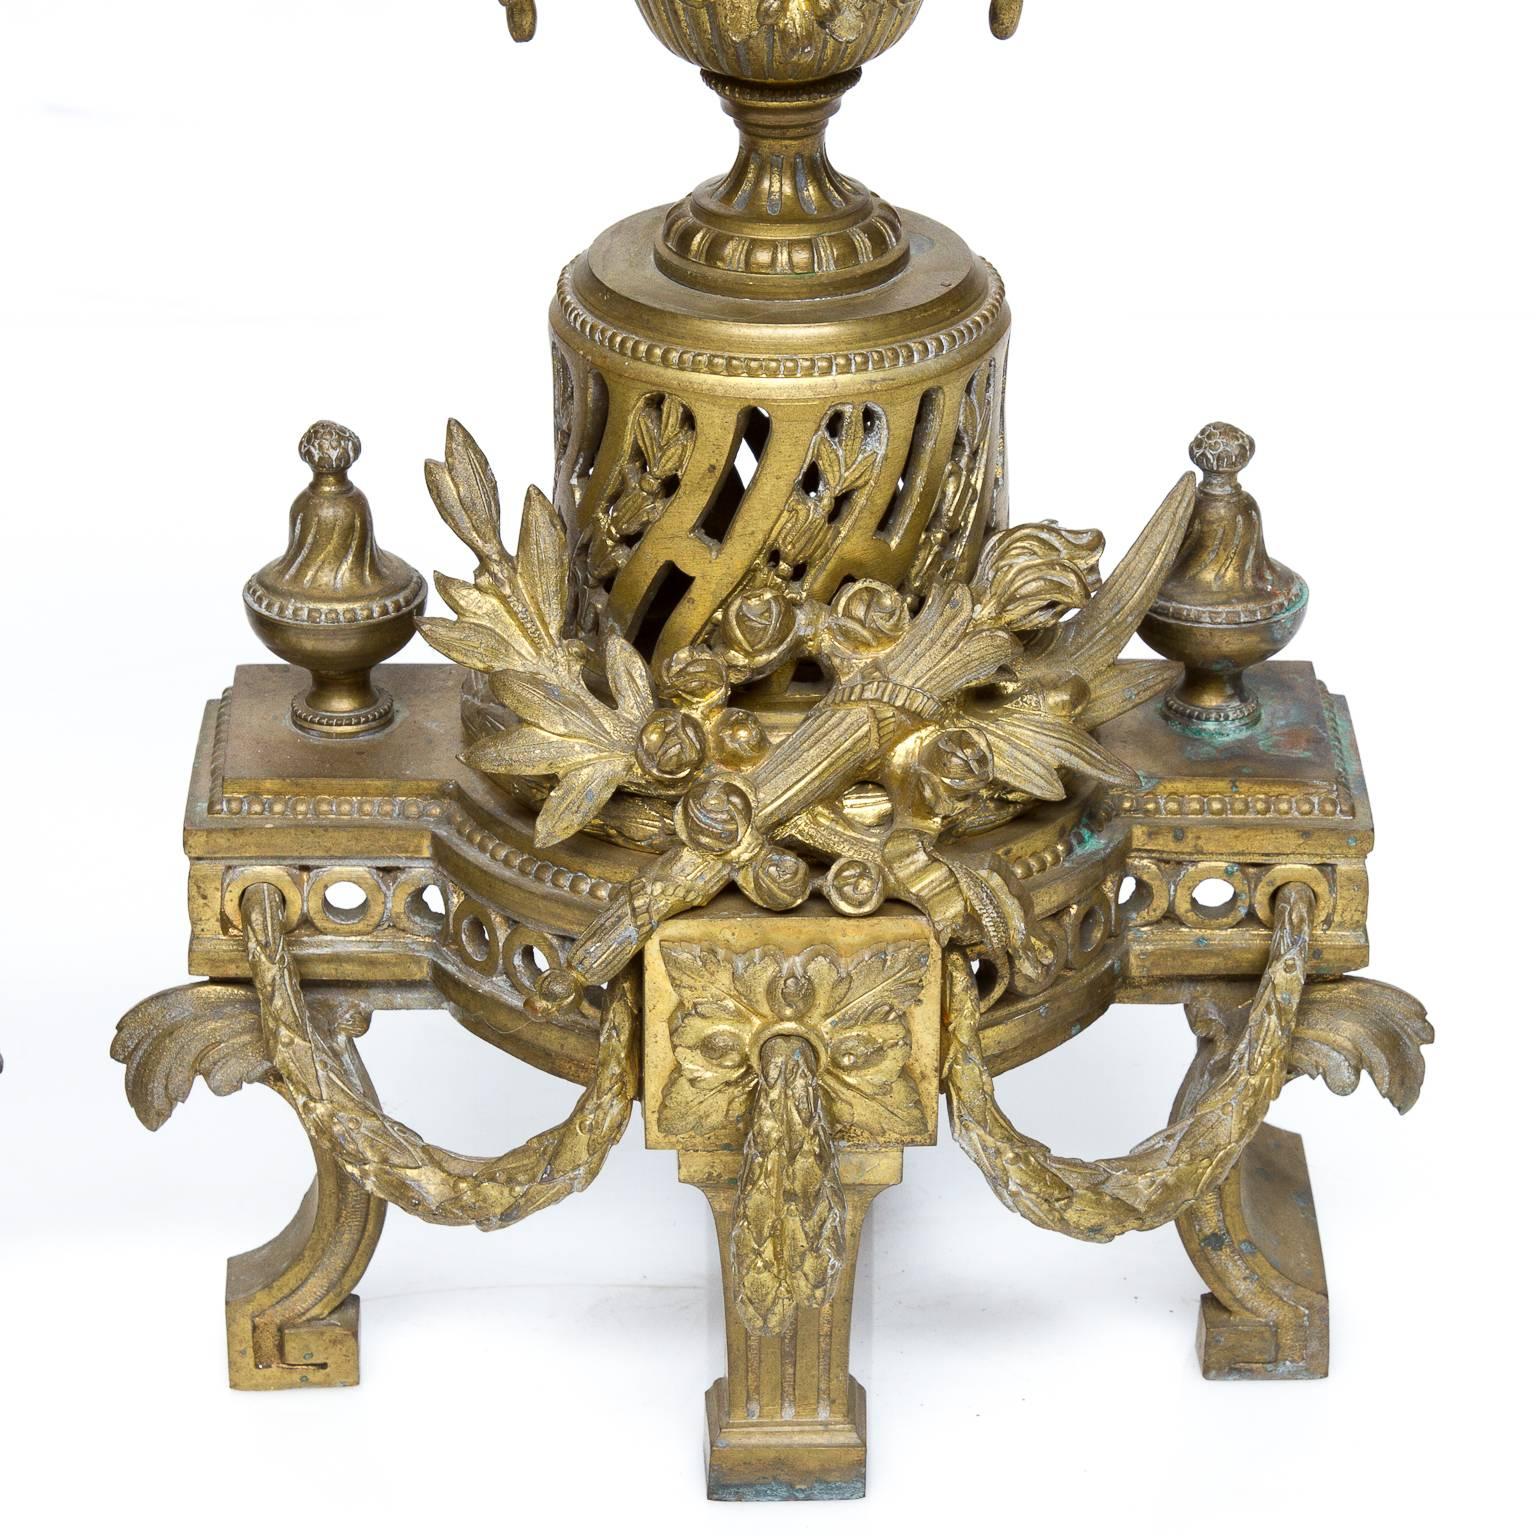 This pair of ormolu Louis XVI Chenets/firedogs. These are made from and with exceptional detail. The detail I noticed first, the trophy centered above the intricate middle leg. The swag designs connect the other legs visually. A pierced column and